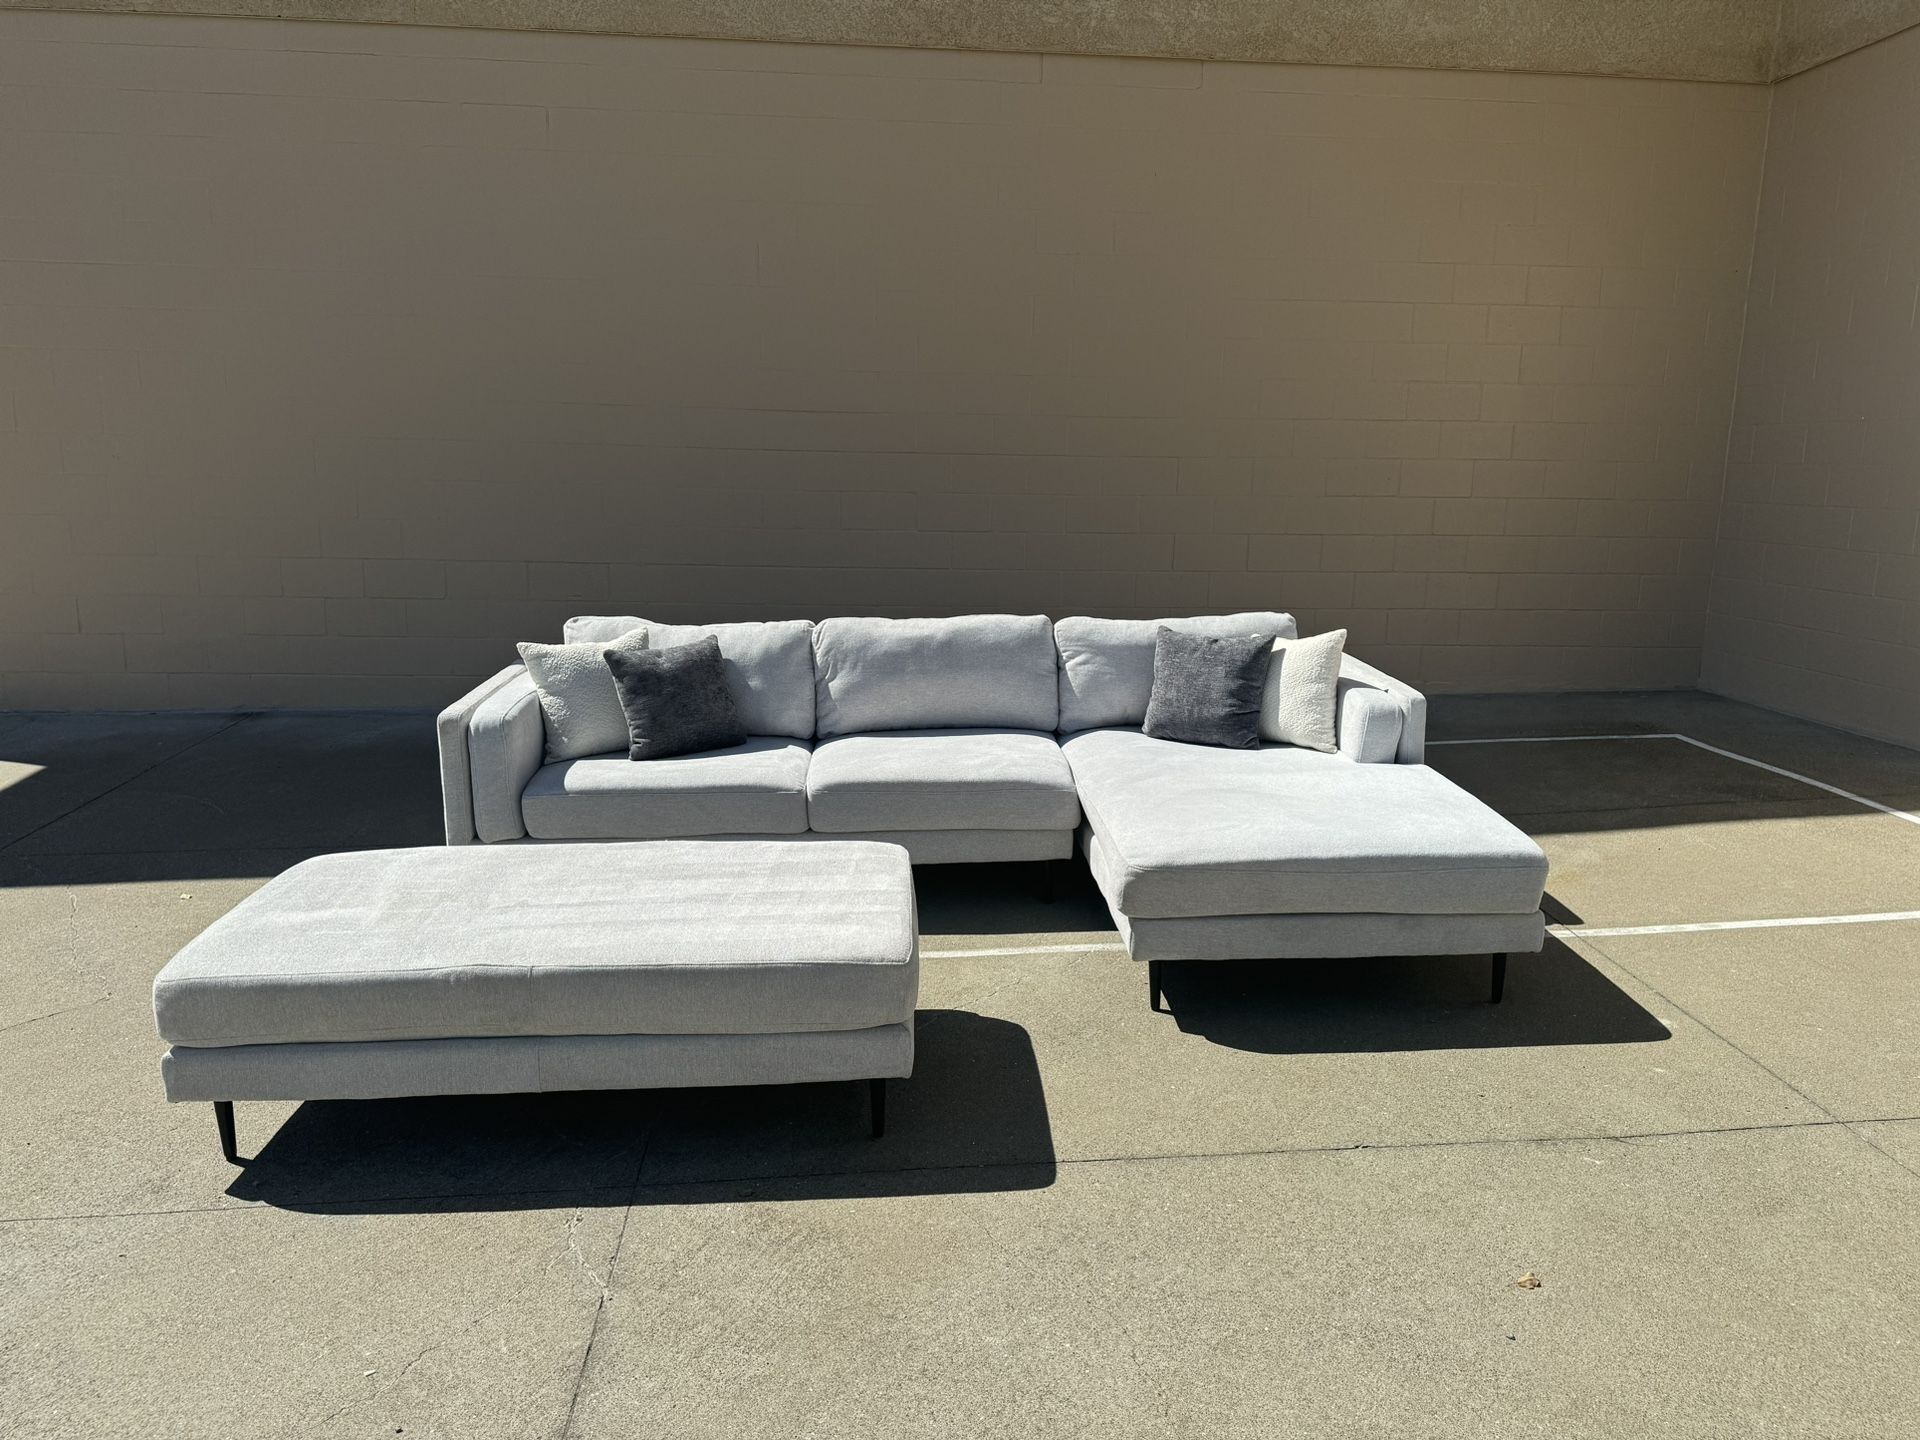 *FREE DELIVERY* Light Grey Living Spaces L Shaped Sectional with ottoman